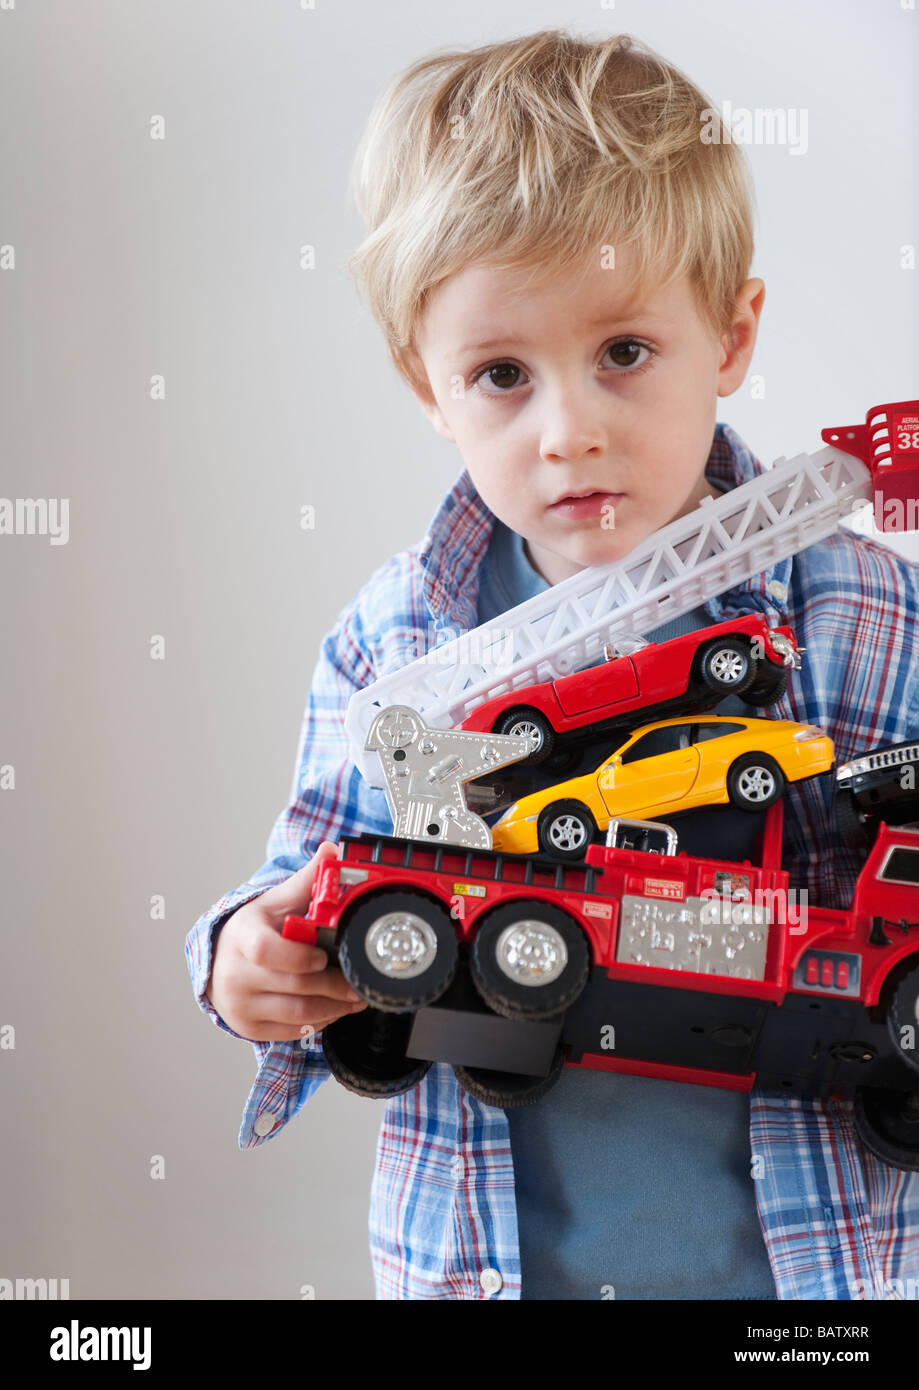 Portrait of boy (4-5) holding toy fire engine and cars Stock Photo